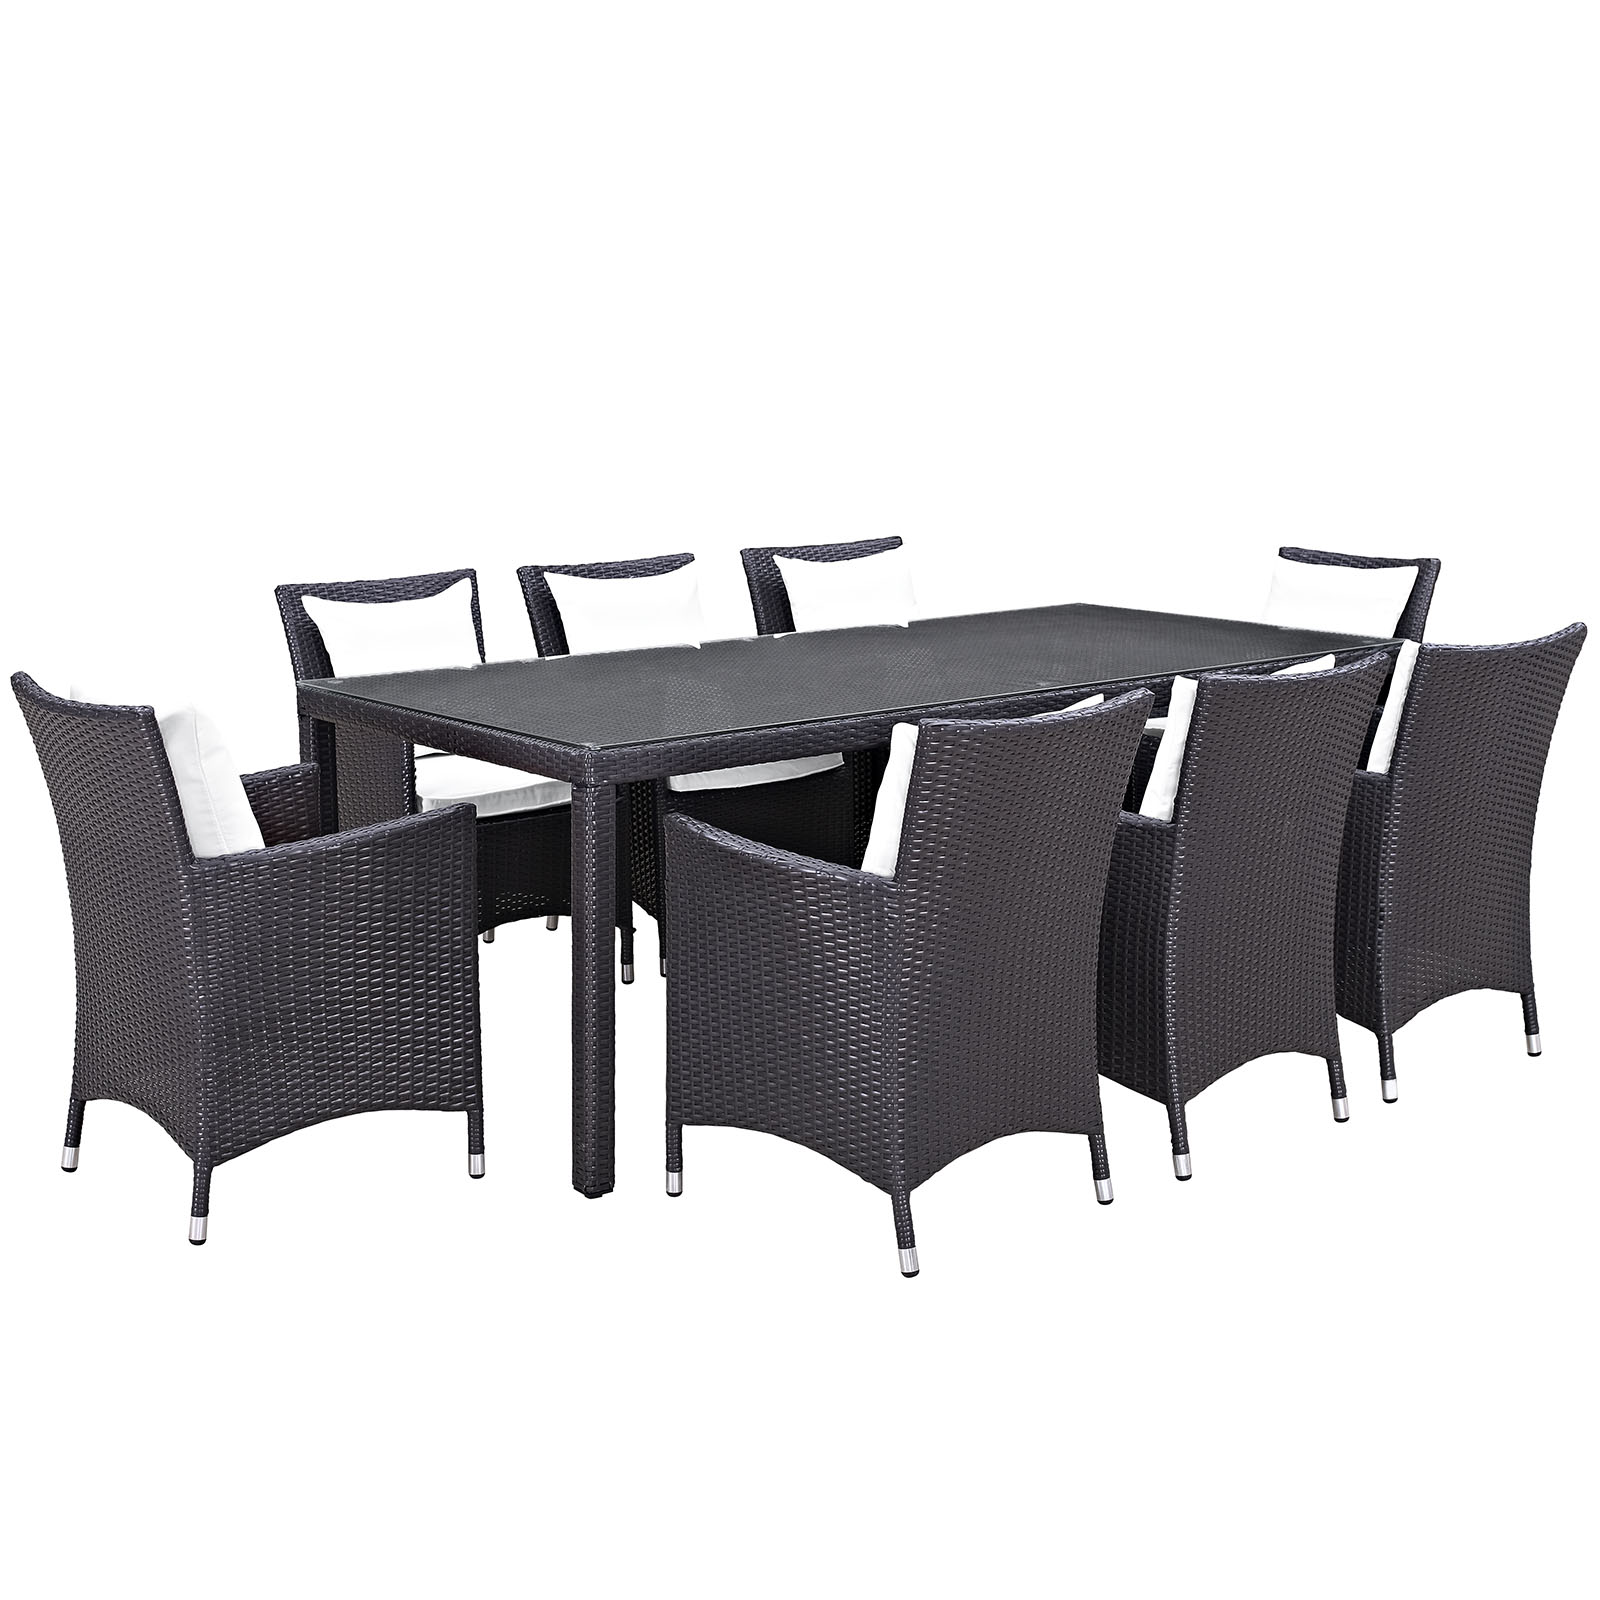 Modway Convene 9 Piece Outdoor Patio Dining Set in Espresso White - image 2 of 7